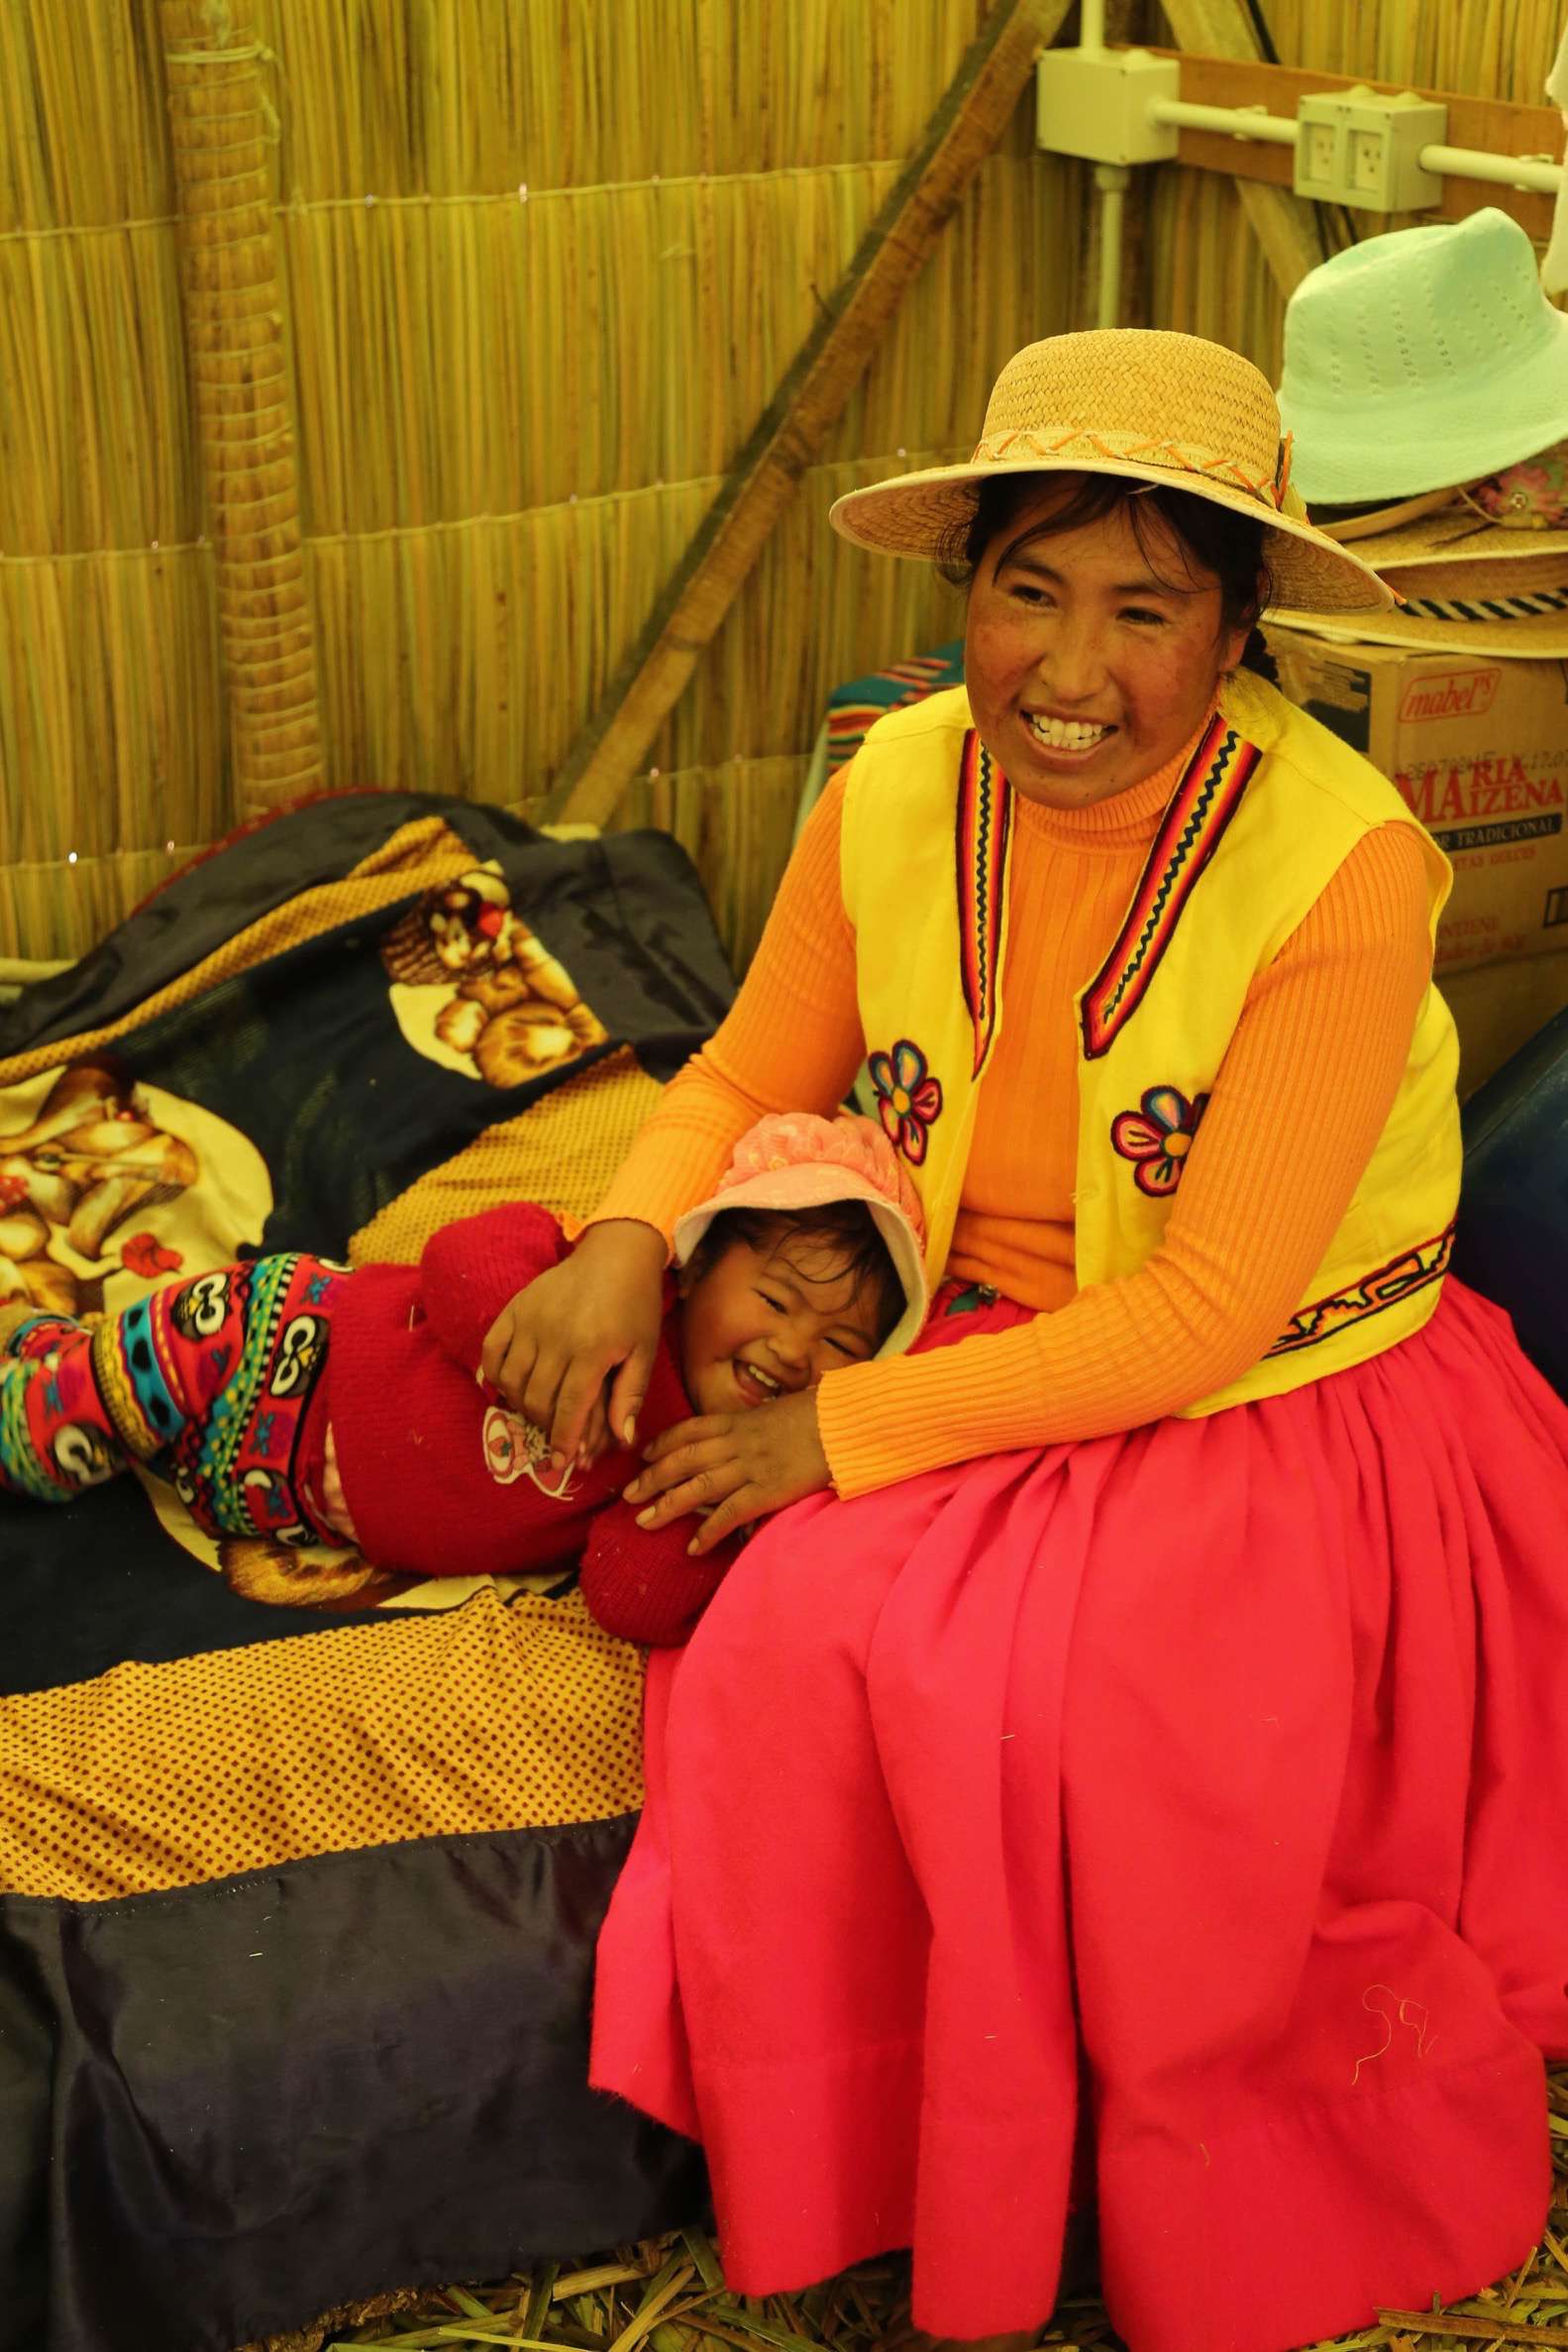 The inside of a hut on a floating island is sparse, but mother and child seem happy.